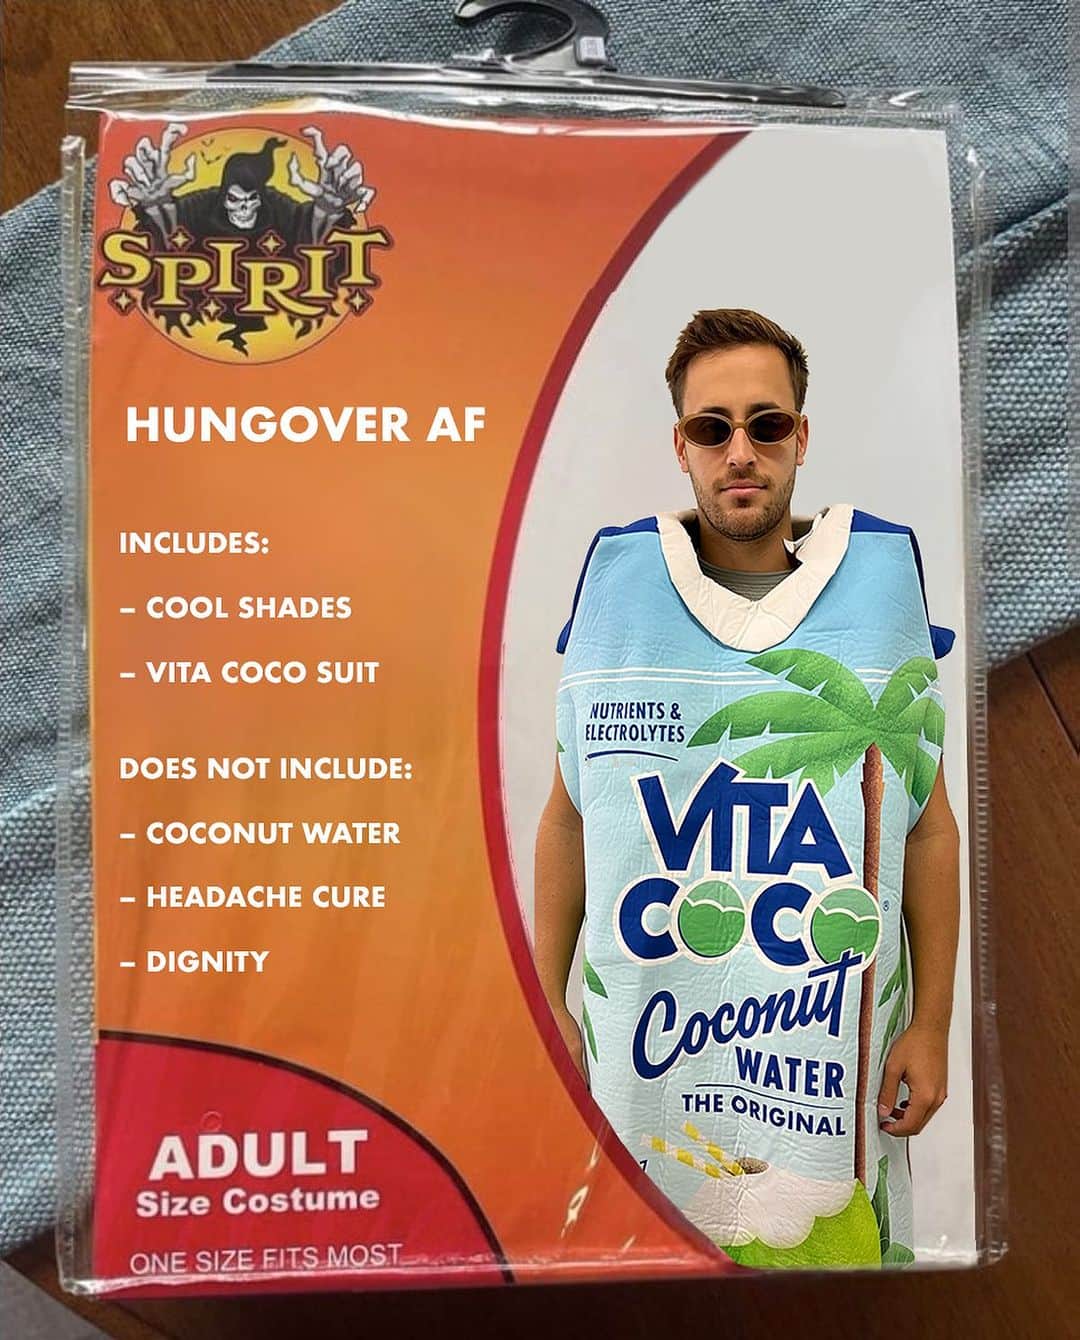 Vita Coco Coconut Waterのインスタグラム：「What are you wearing this year? Vita Coco related answers only please.」